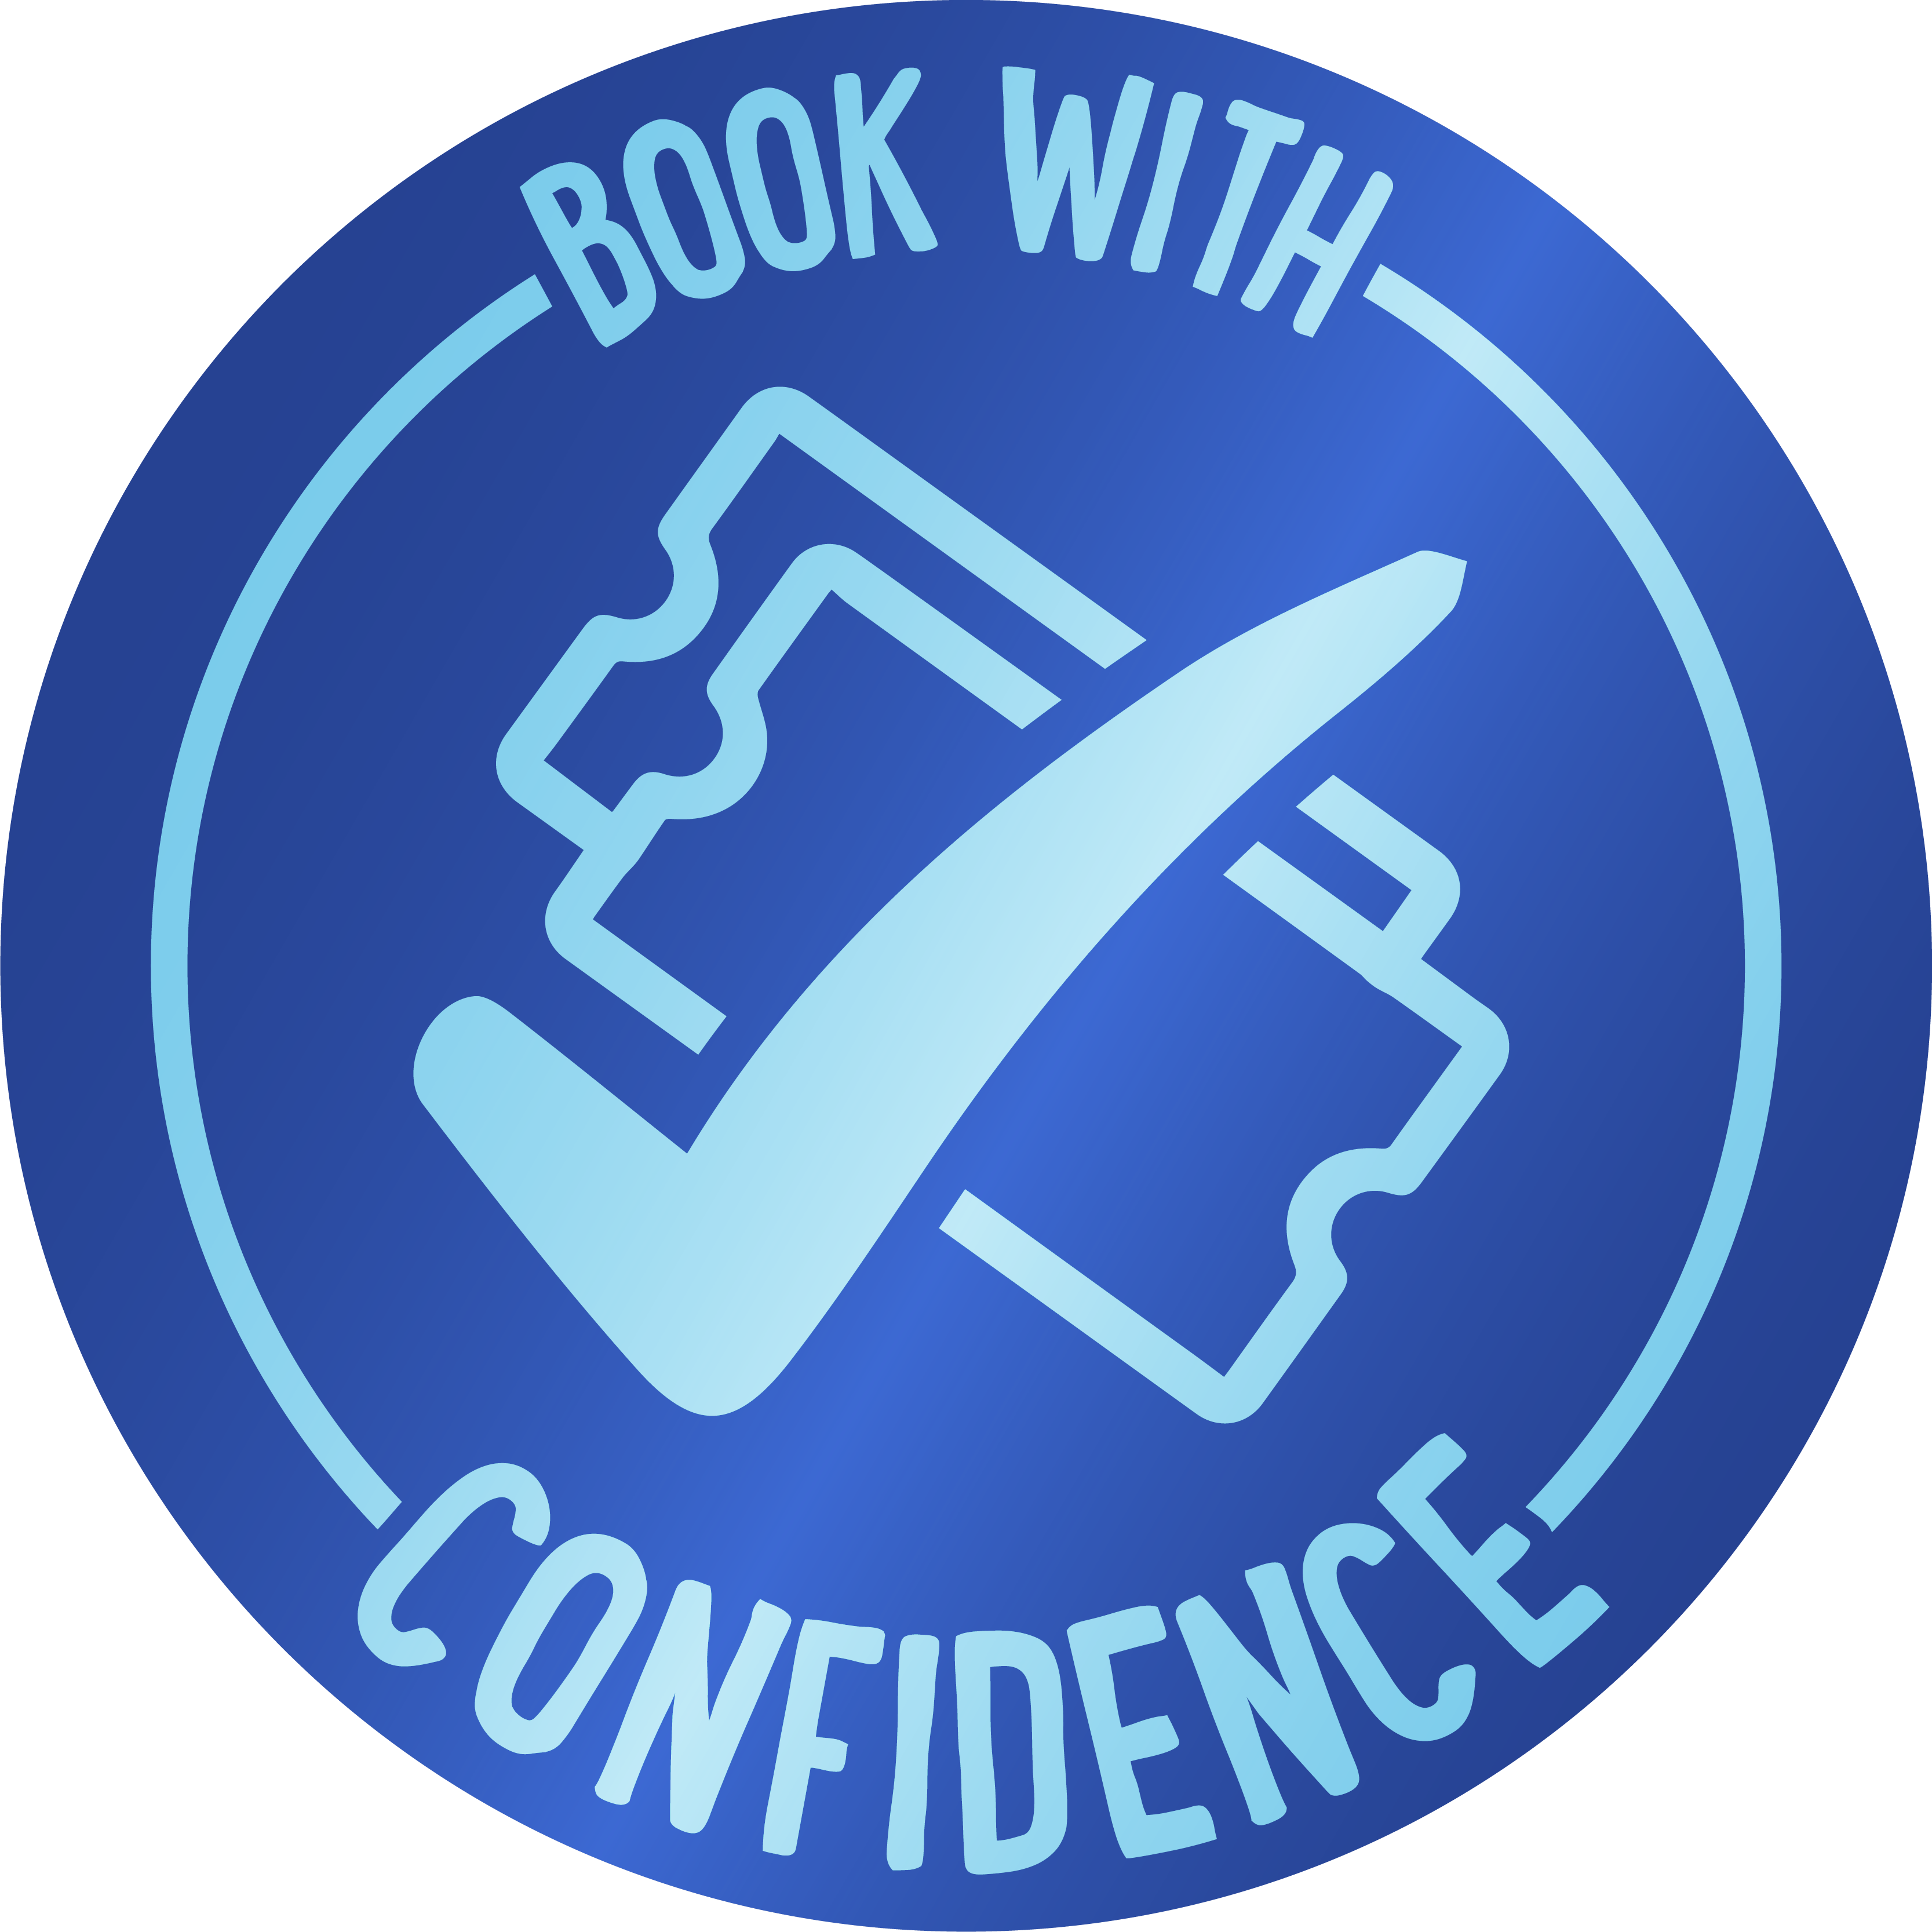 Booking with confidence